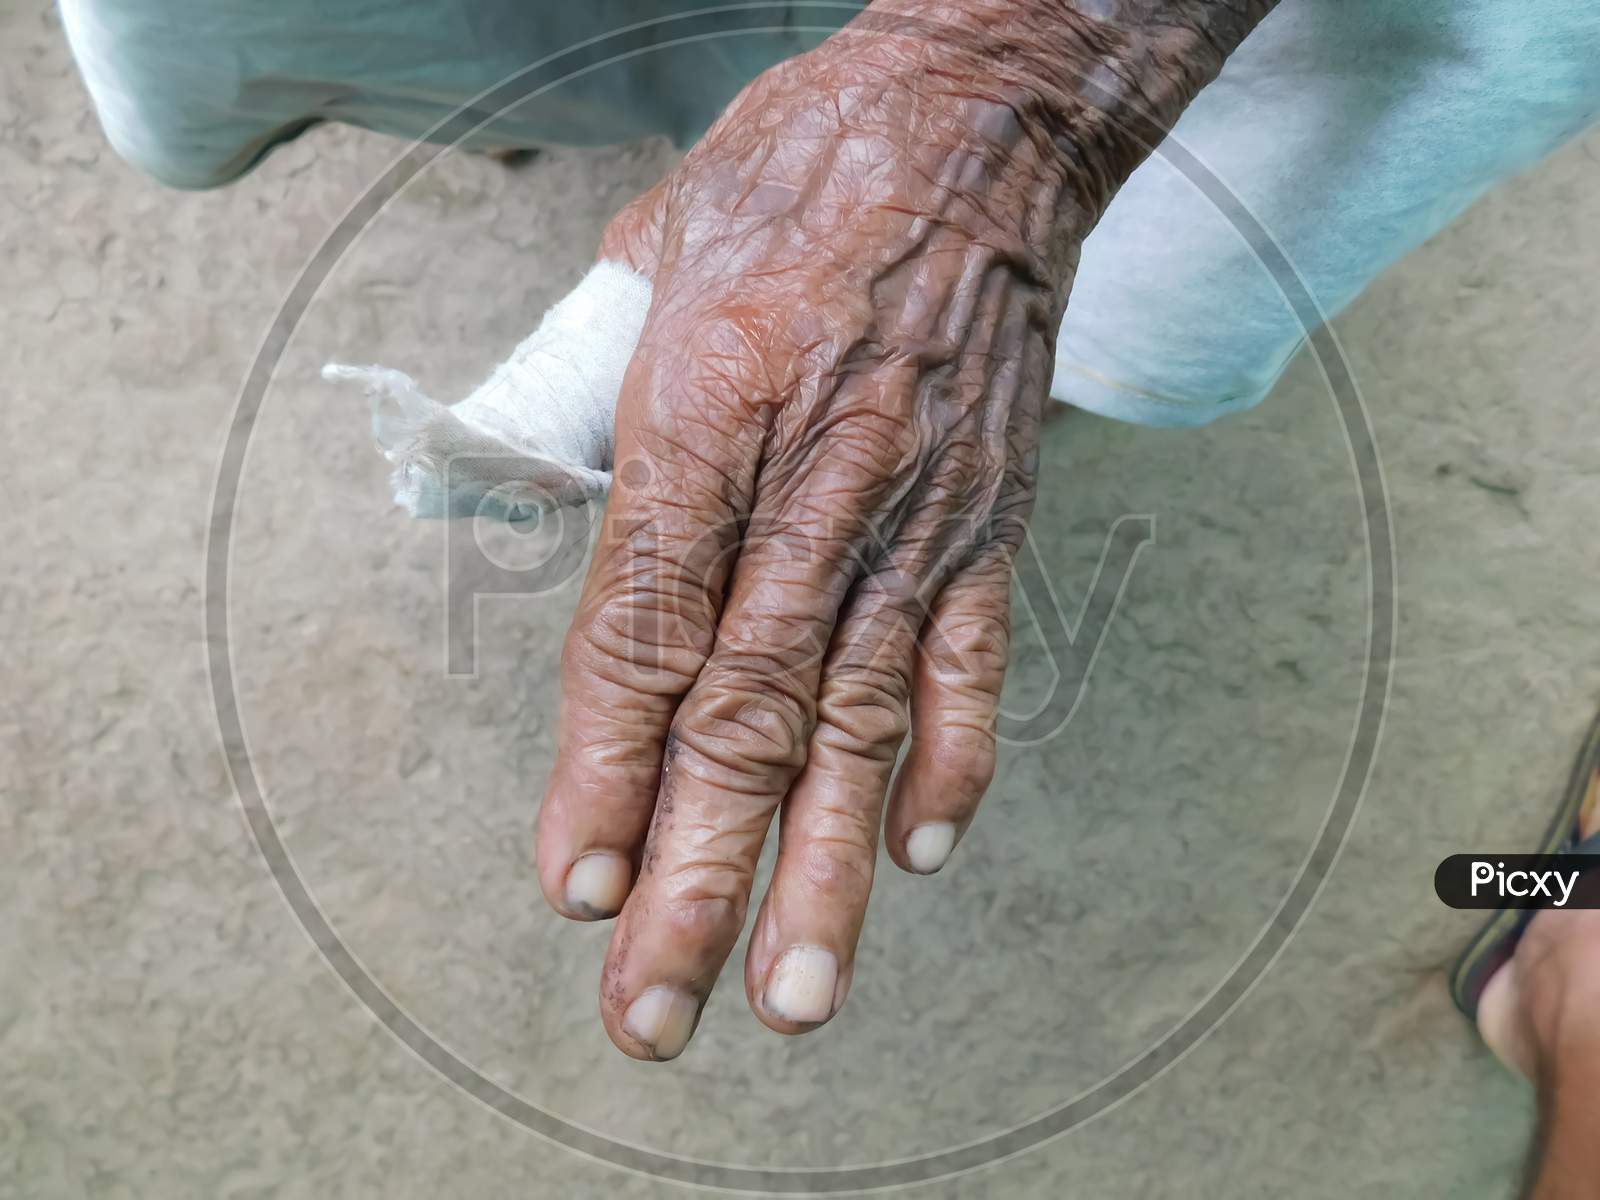 Closeup Of An Old Women Hand With Injured Finger